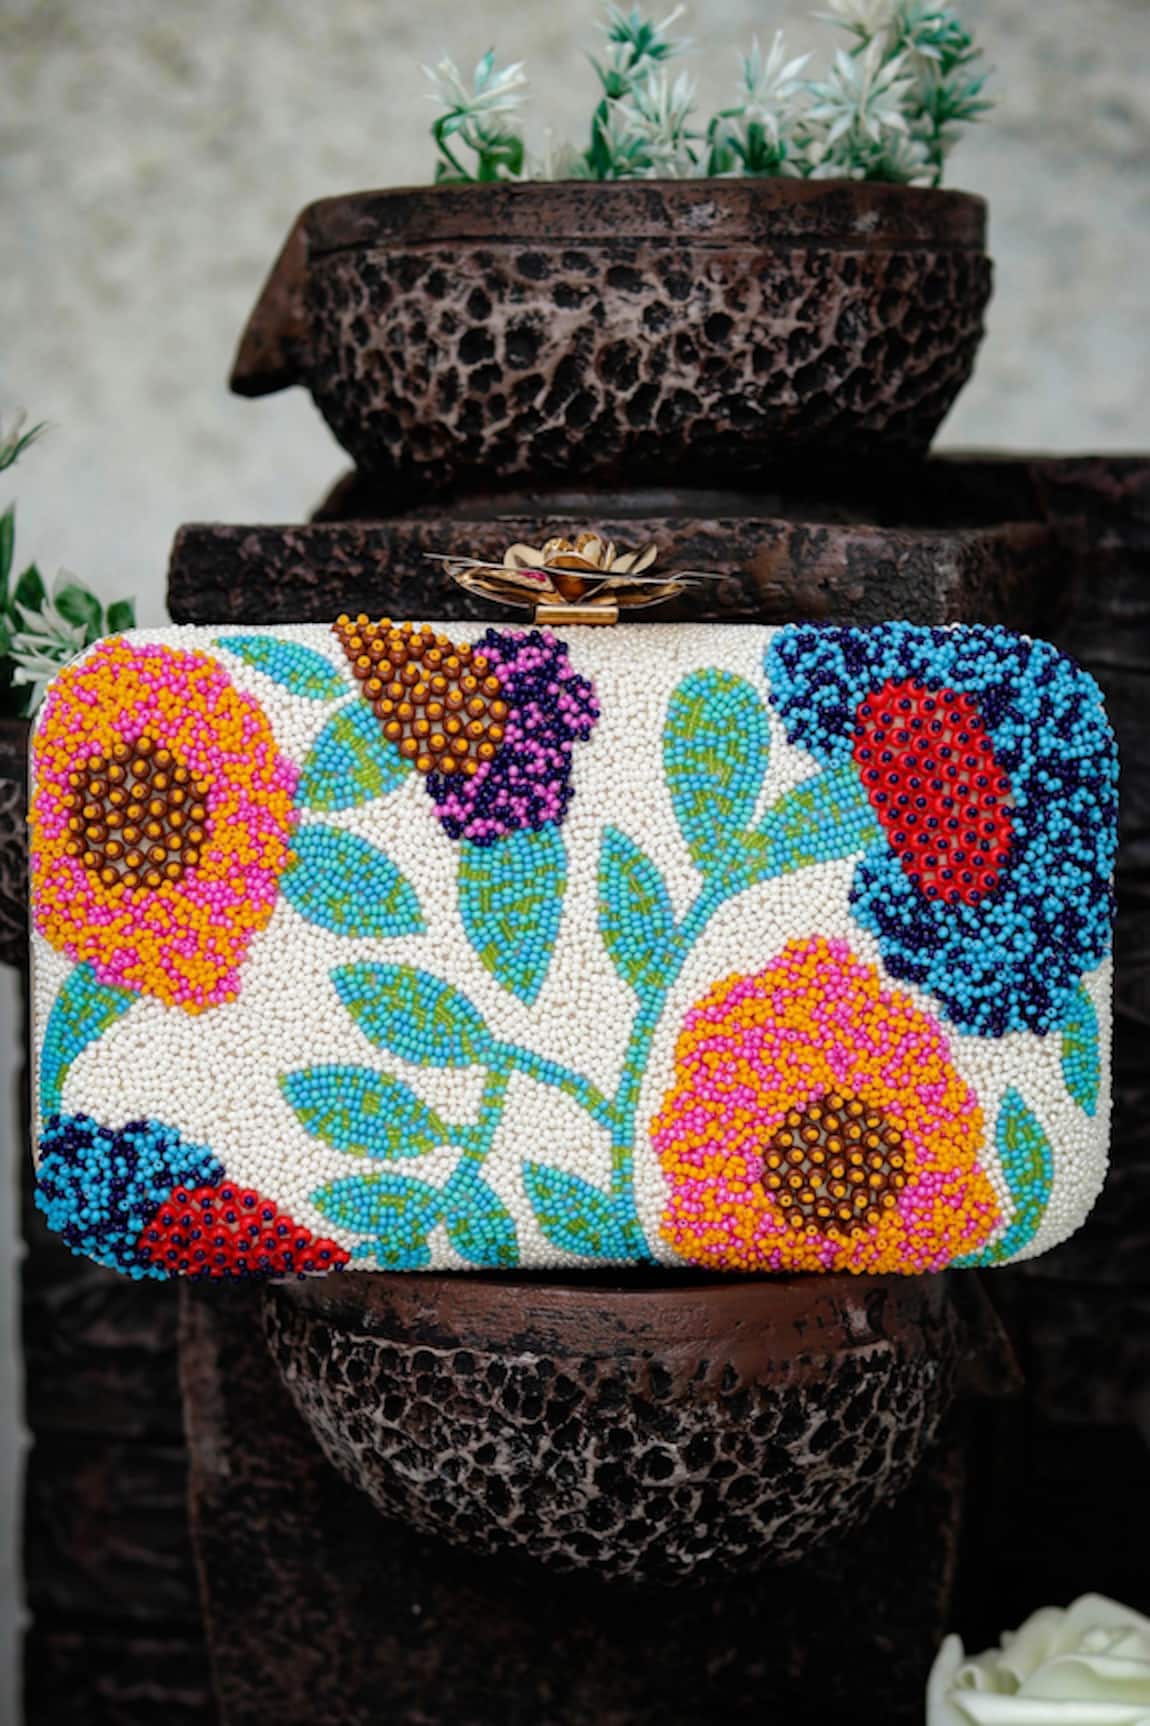 NR BY NIDHI RATHI Silk Hand Embroidered Clutch Bag